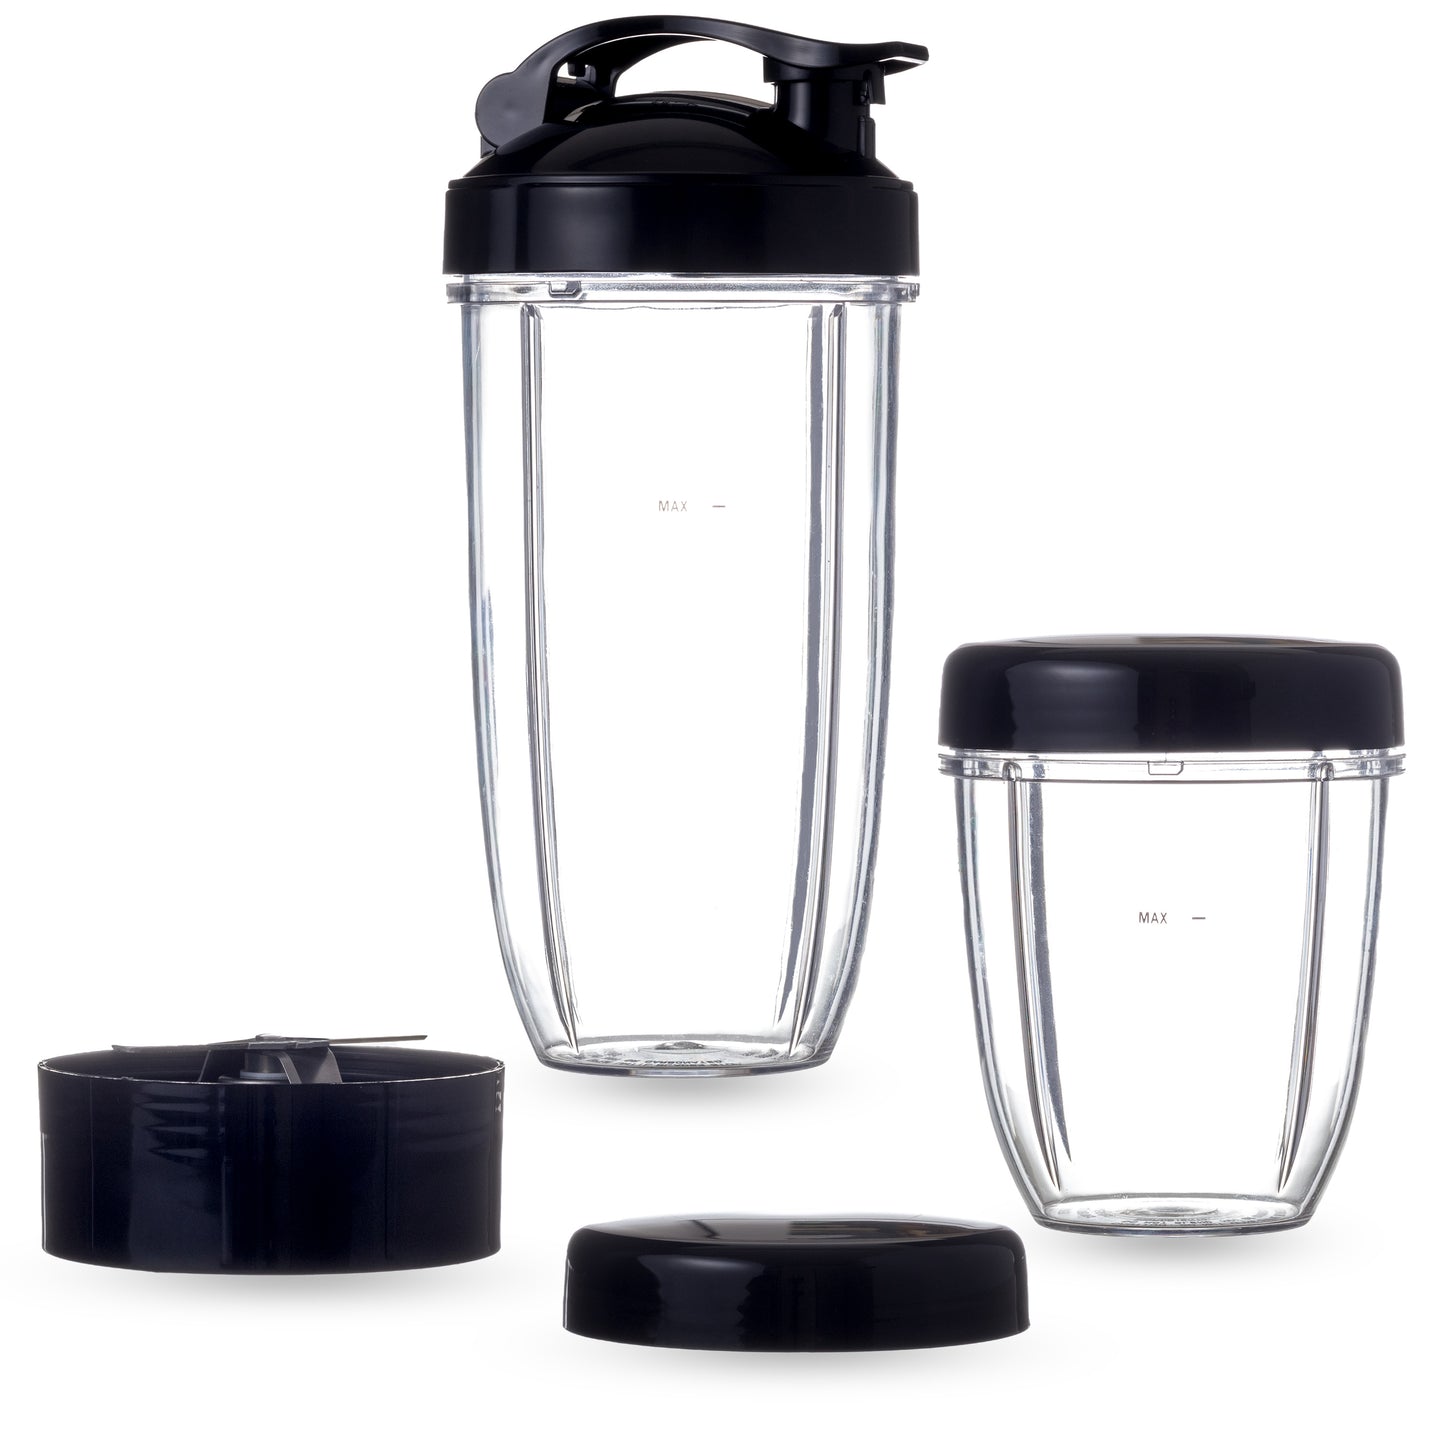 Nutrition Mixer SMART BLENDER - DELUXE SET 12tlg. - BOB HOME - modern lifestyle products